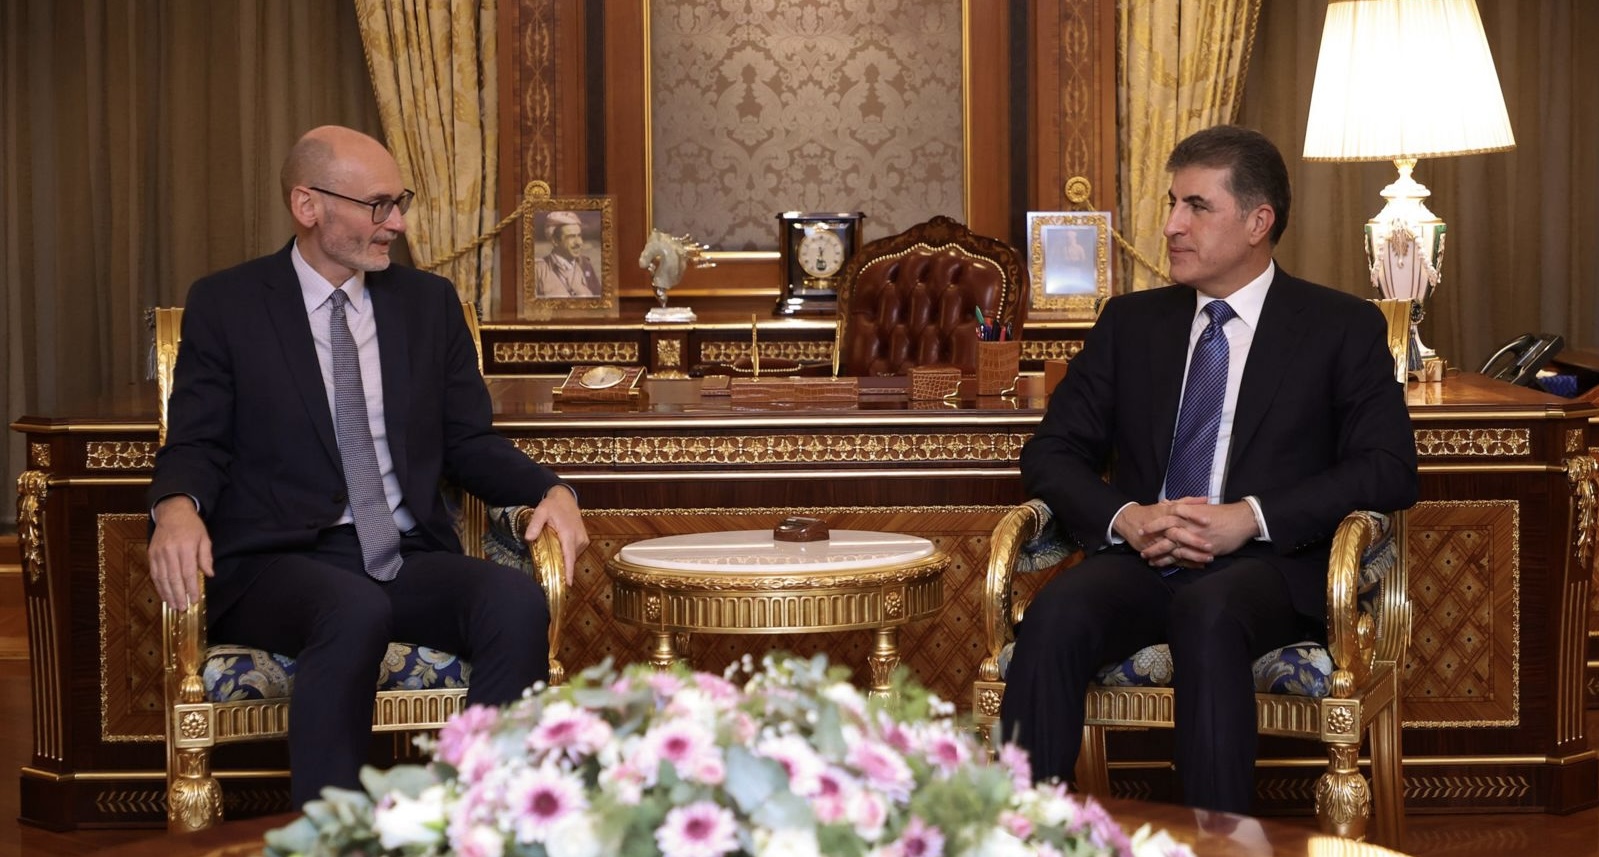 Kurdistan's president, British ambassador say Iraq should not be involved in the Mideast "complexities"